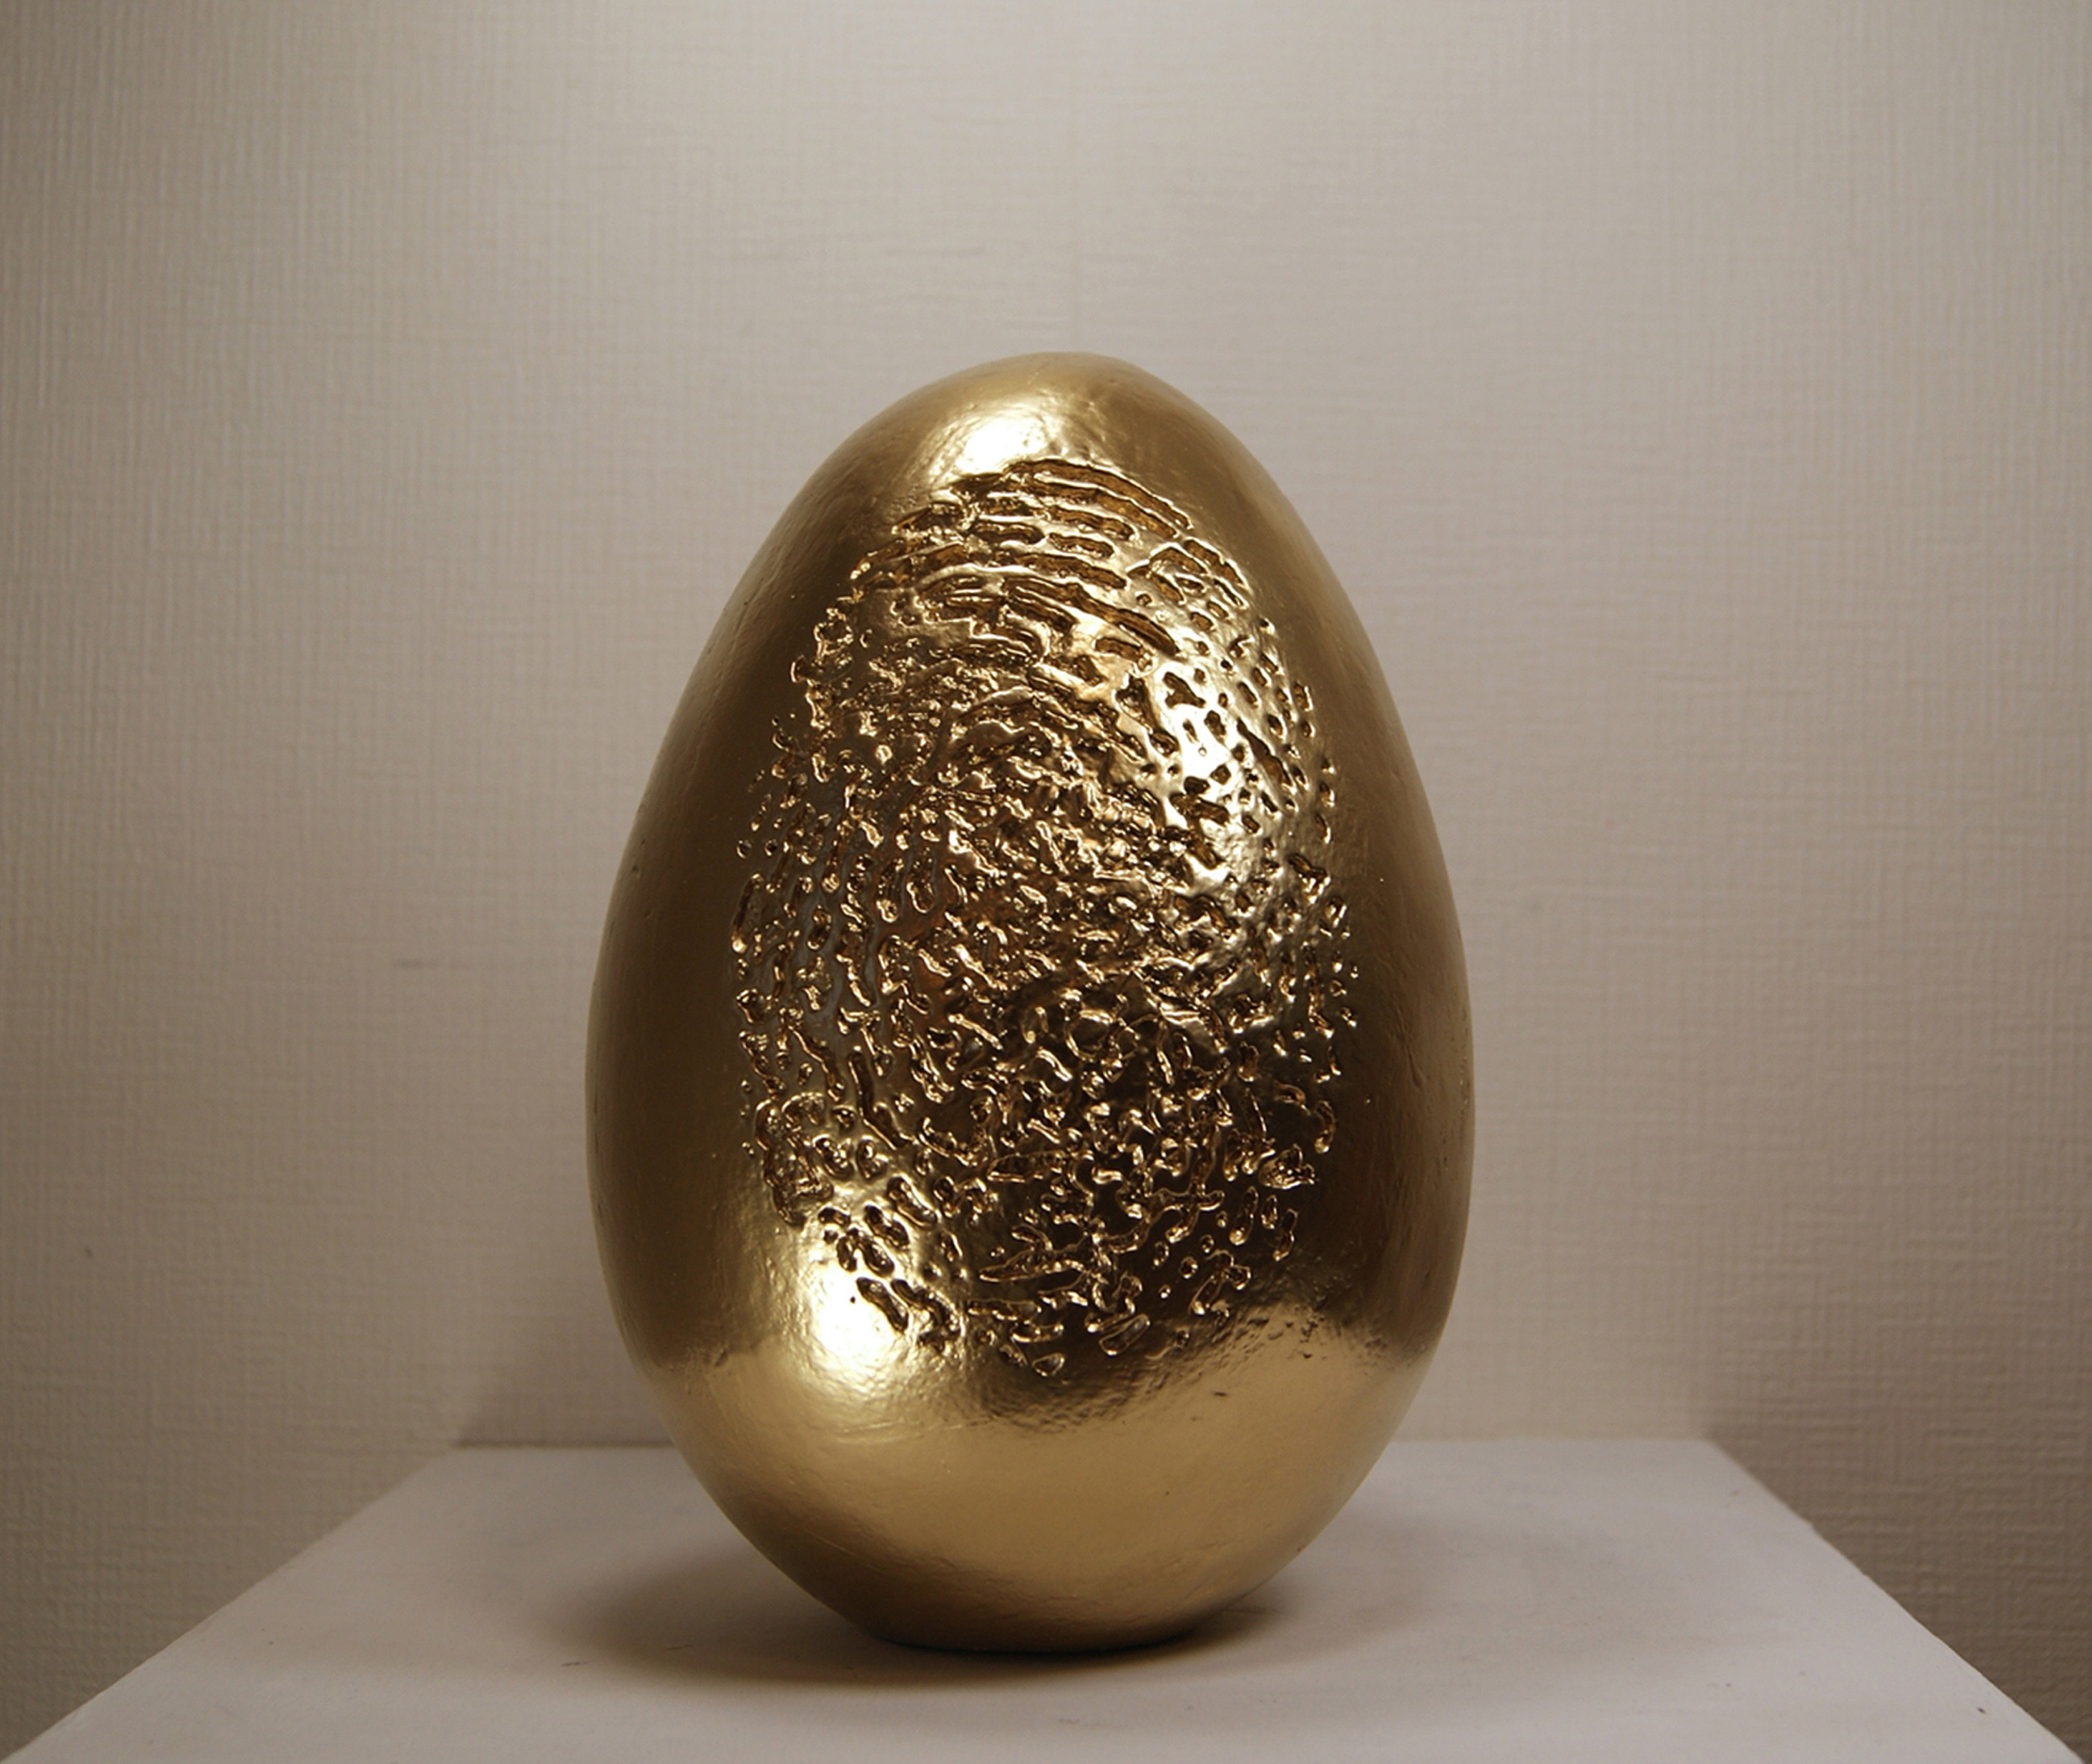 Personal egg, gold